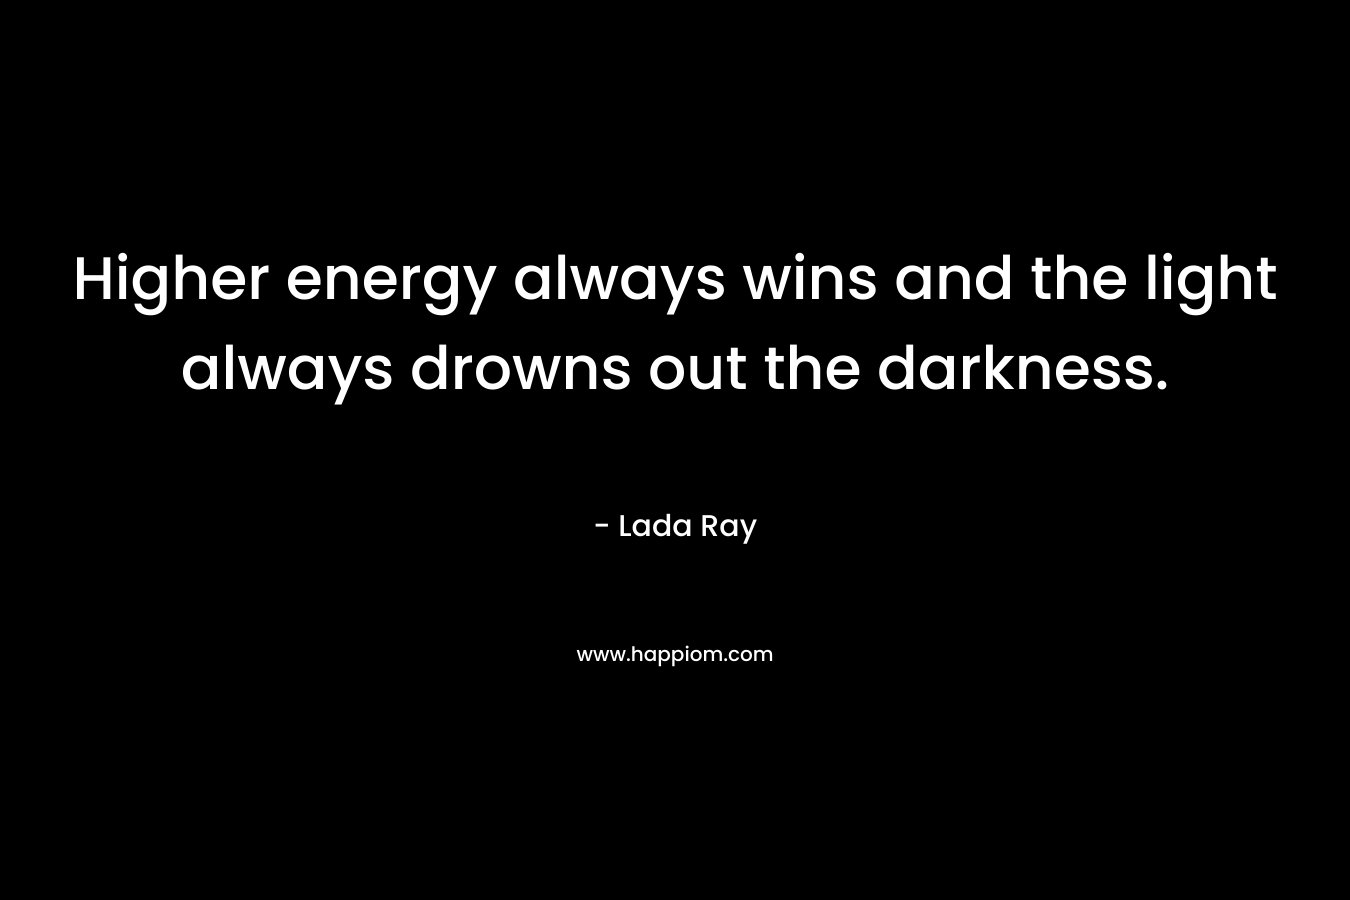 Higher energy always wins and the light always drowns out the darkness.